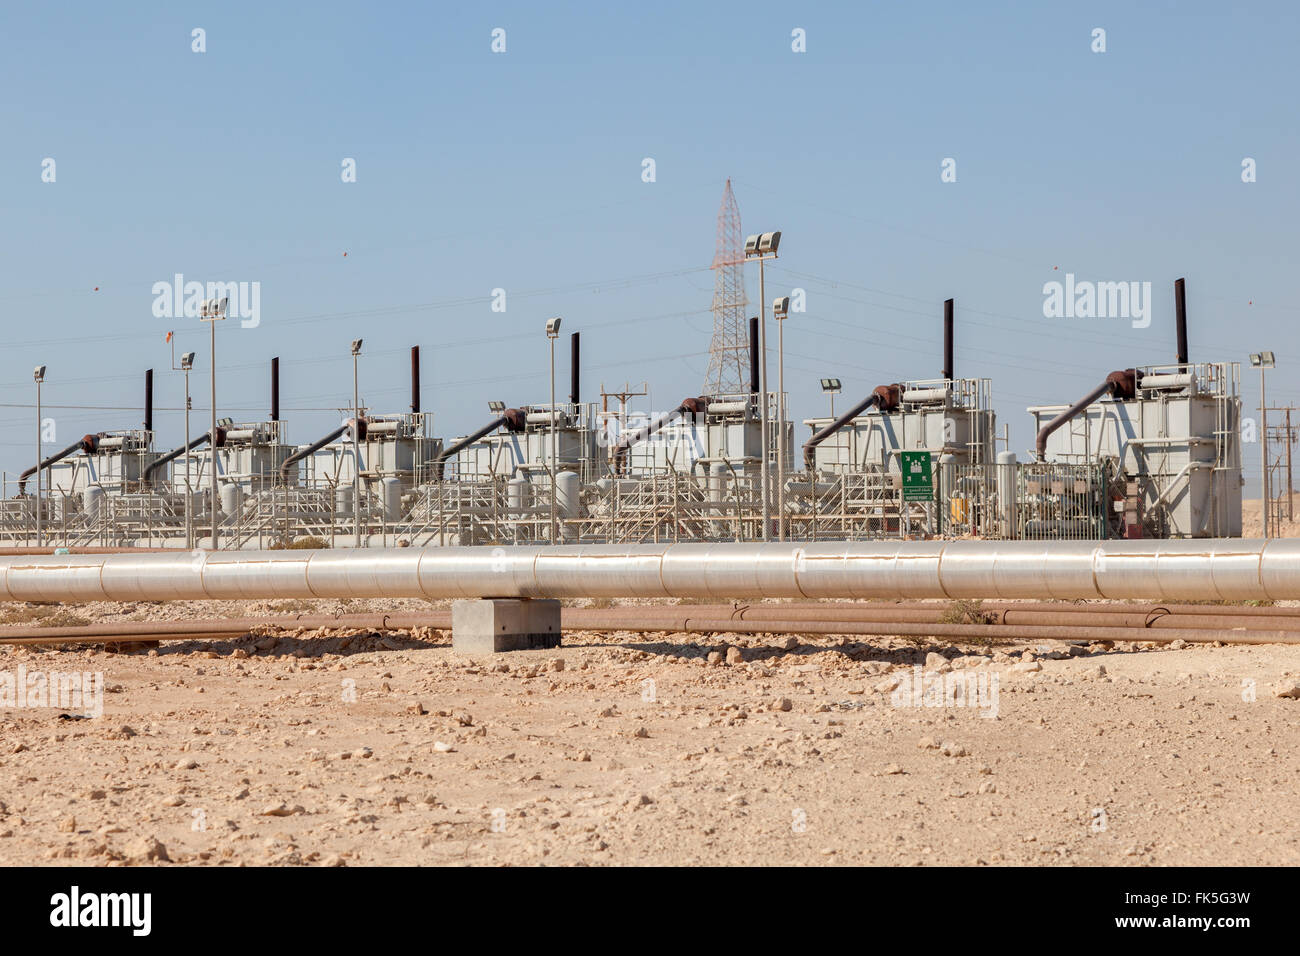 Petrochemical facilities in the desert Stock Photo